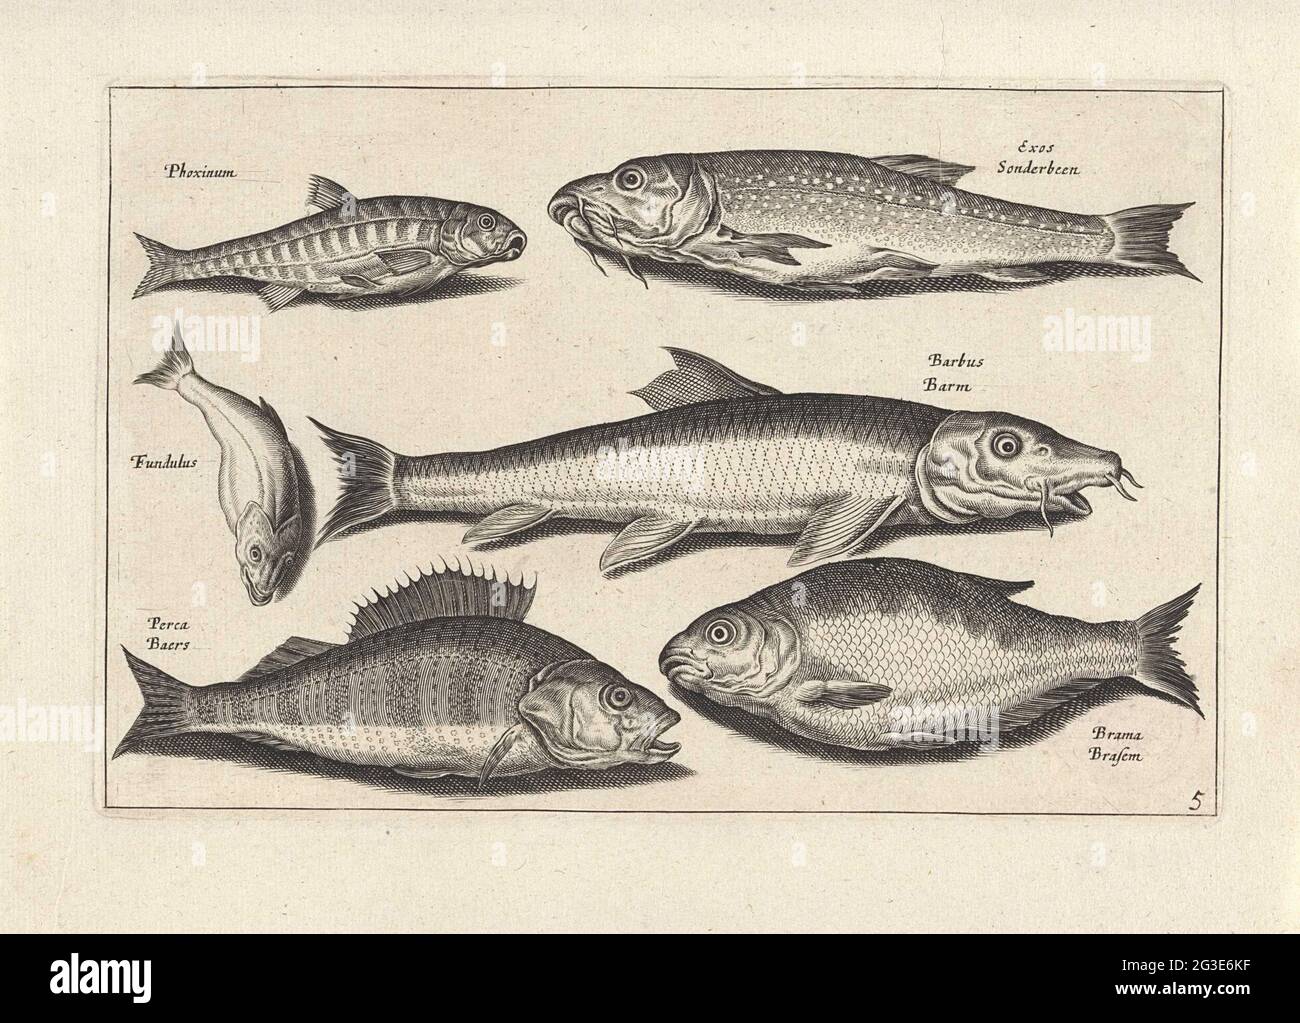 Six fish including a perch; Fishing; PISCIUM VIVAE ICONES. A phoxinus, a fundulus, a dotted fish, a barbus, a perch and a bream. Each fish is equipped with its name. The print is part of a series of fish as subject. Stock Photo